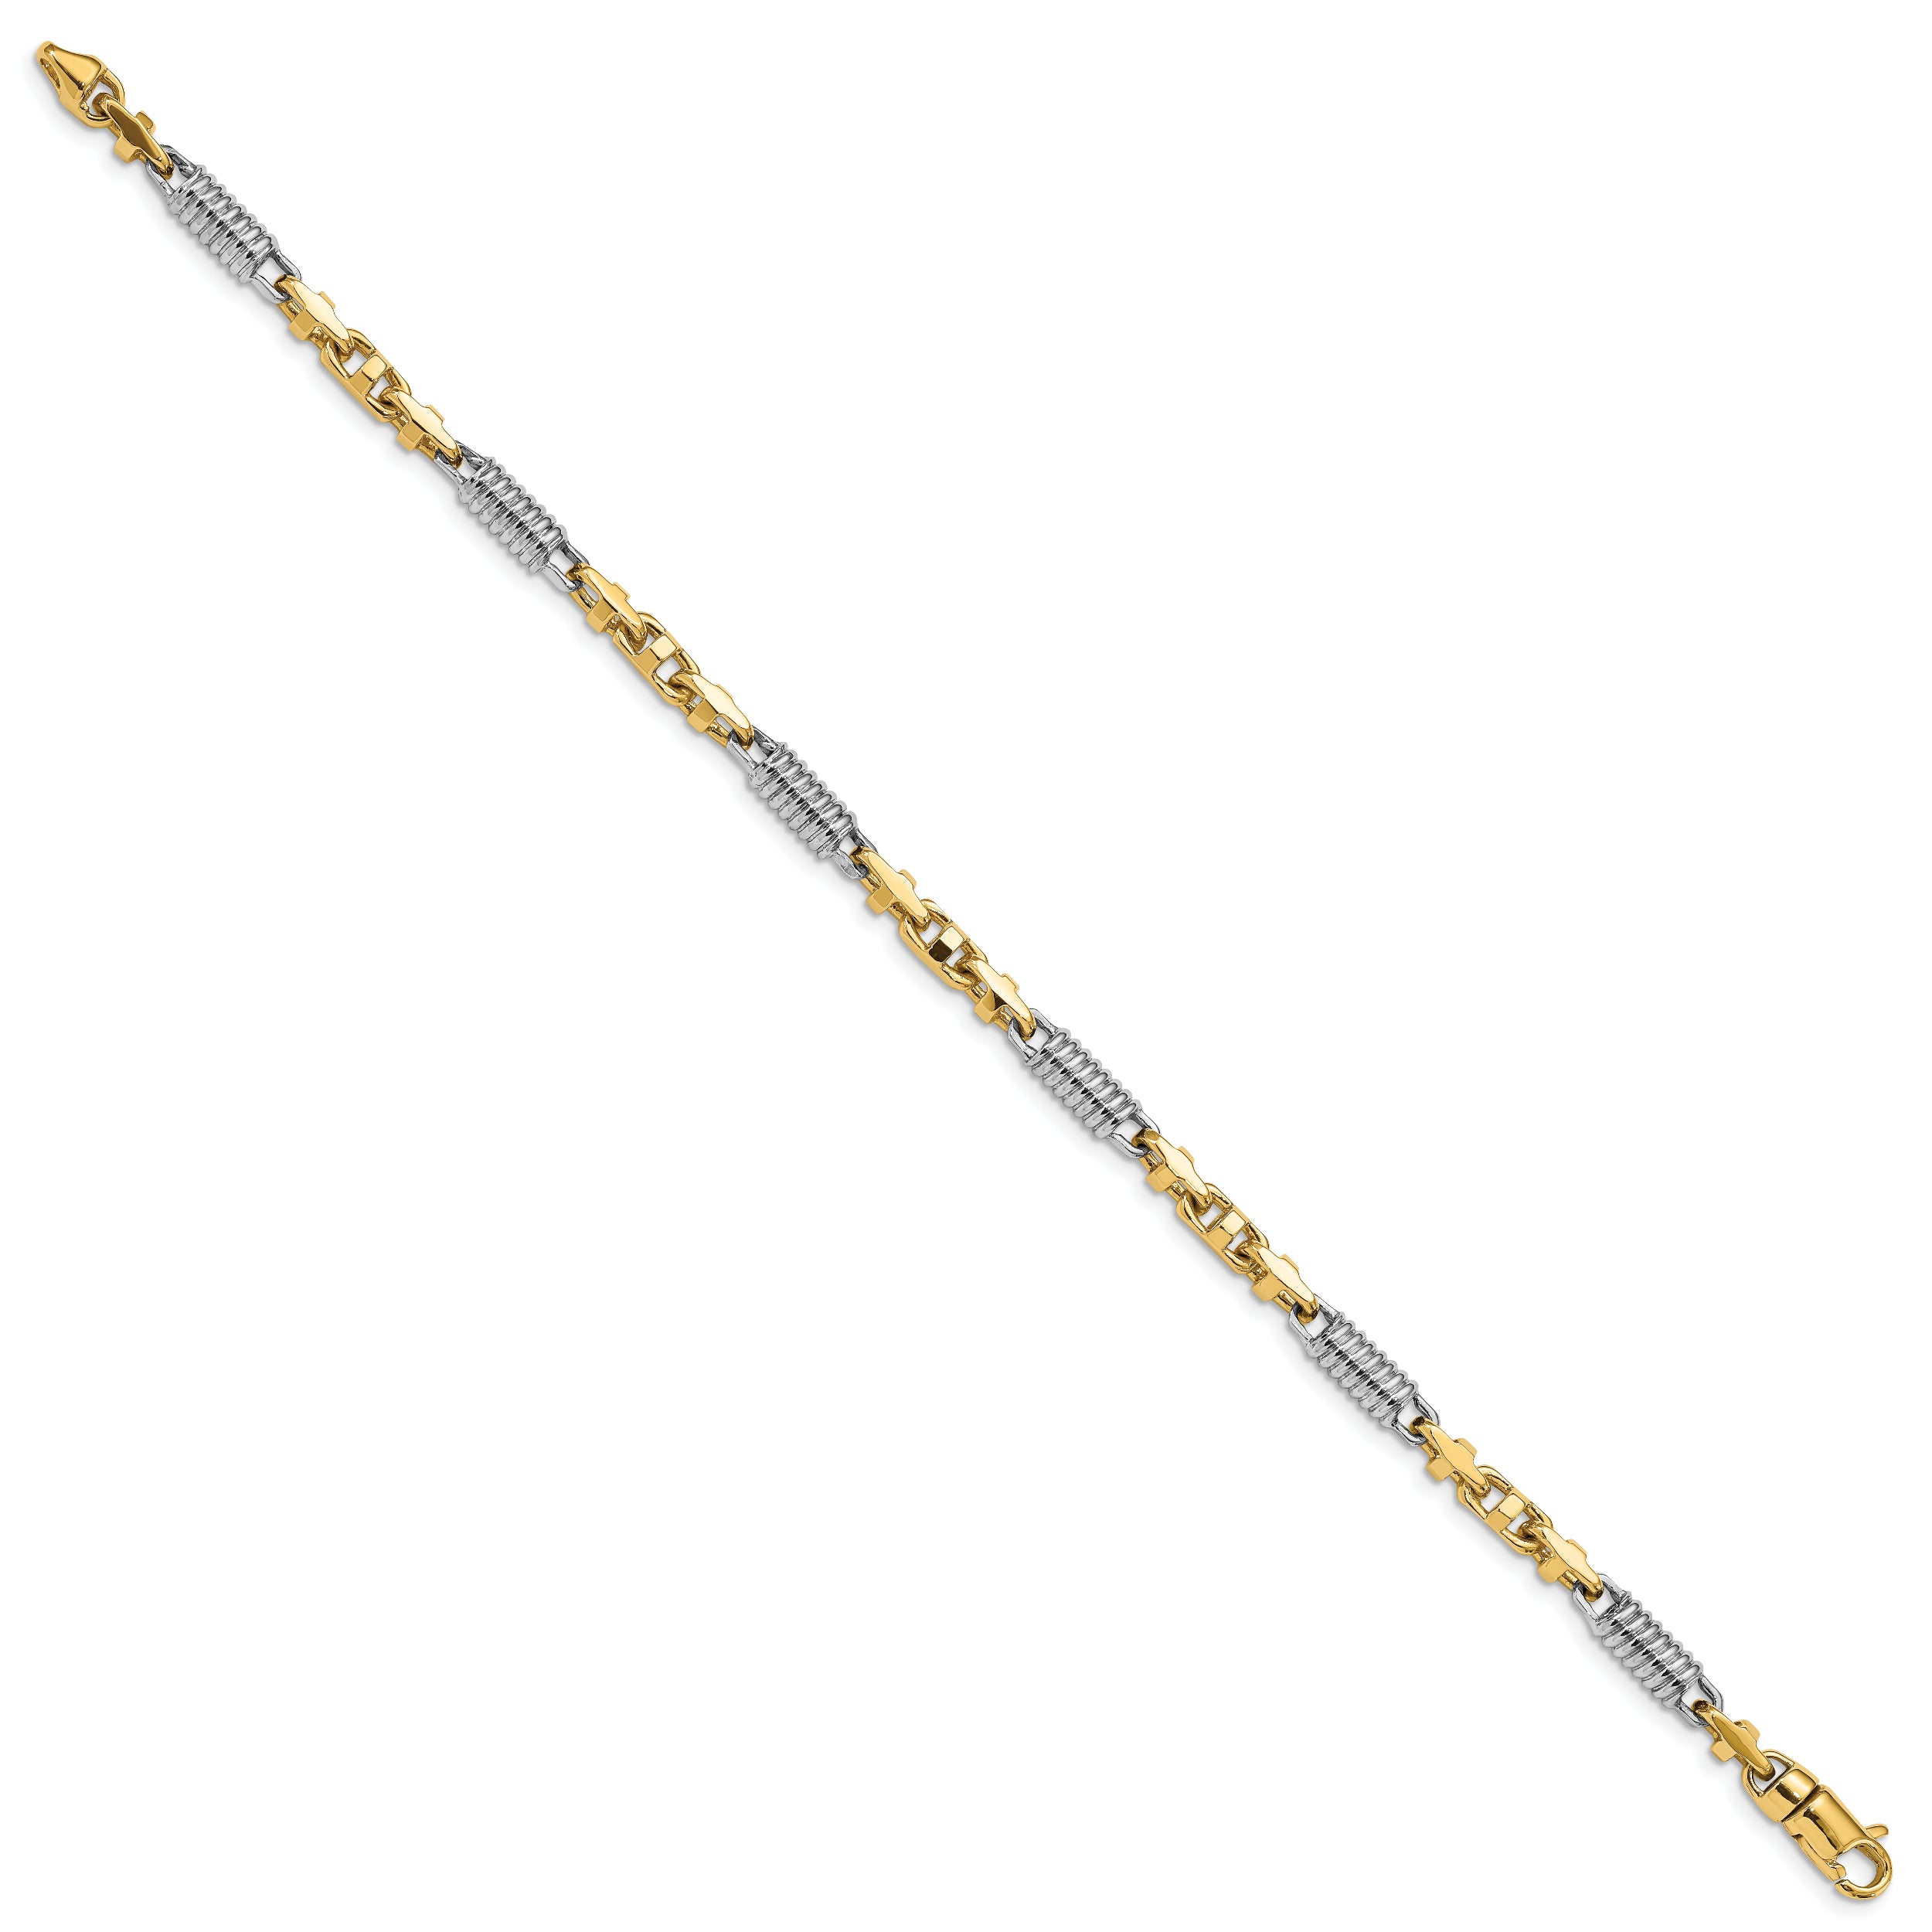 14k Two-tone 8.75 inch 4.6mm Hand Polished Fancy Link with Lobster Clasp Bracelet